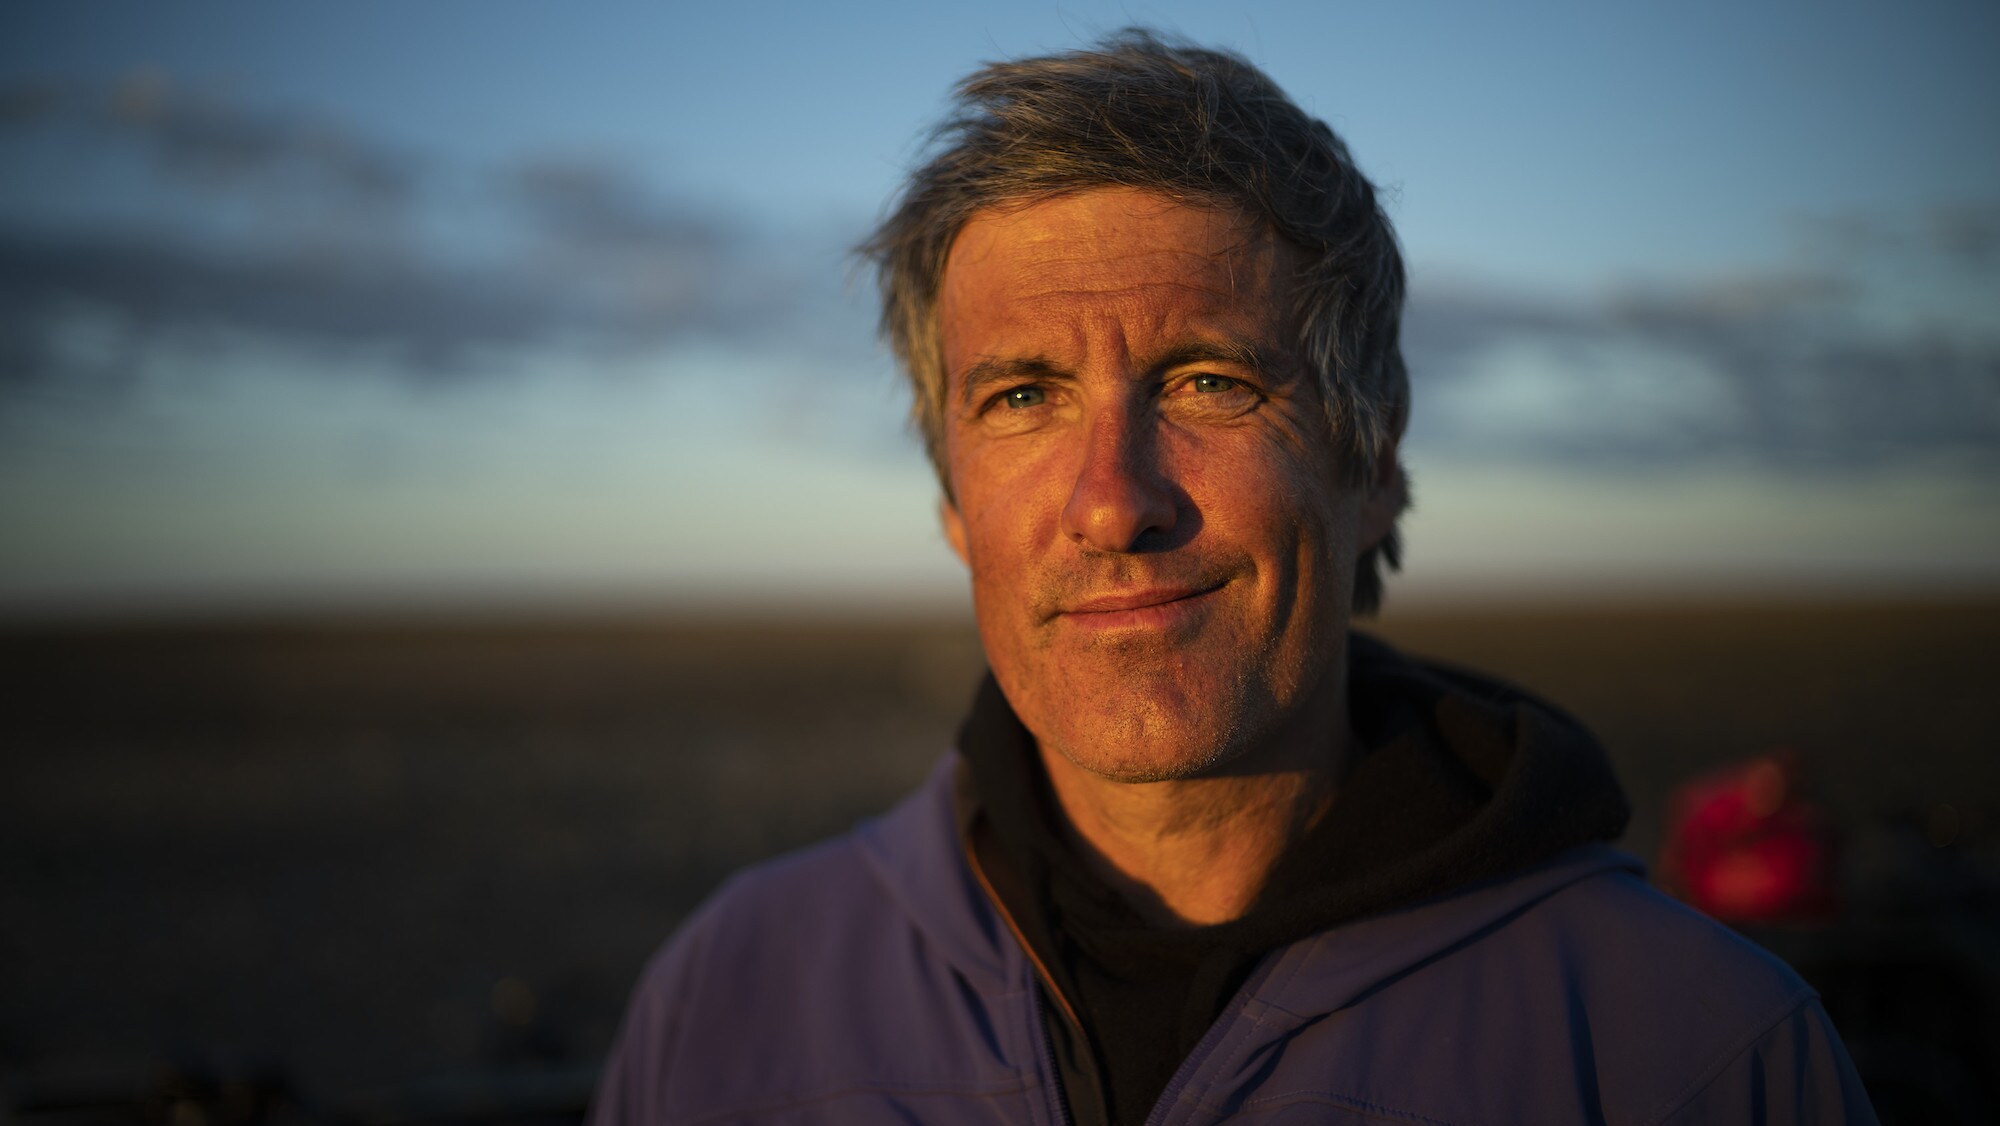 Explorer Mark Synnott poses for a portrait in King William Island, Nunavut, Canada. He is part of a team searching for Sir John Franklin's lost tomb on King William Island, Nunavut, Canada. (National Geographic/Renan Ozturk)